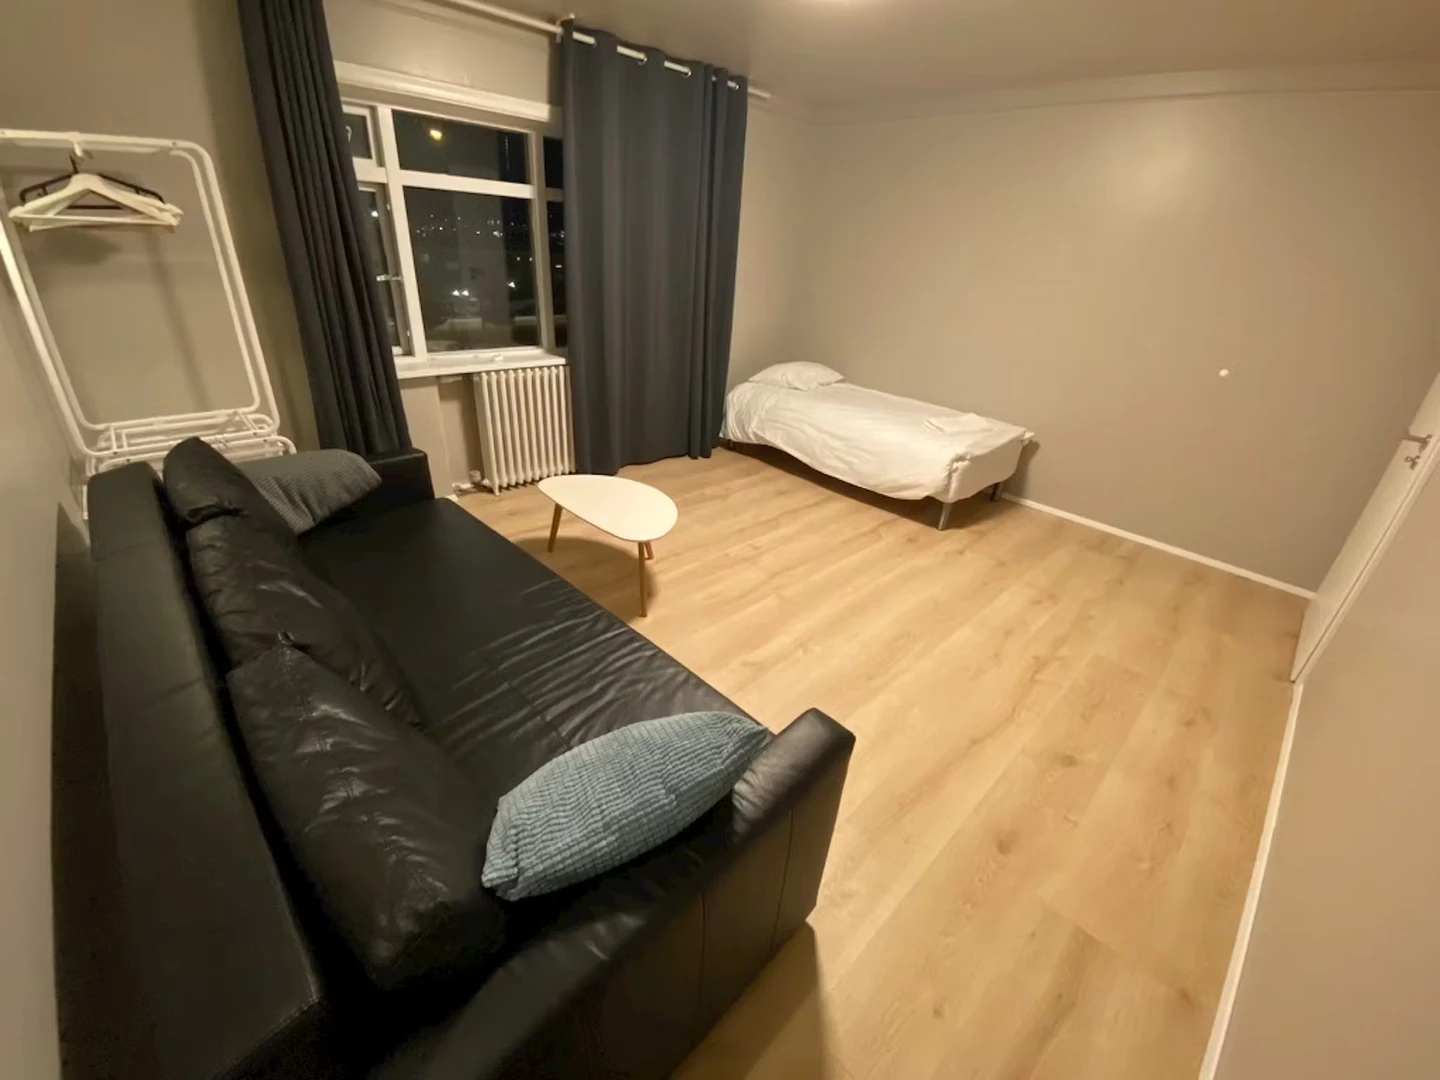 Room for rent in a shared flat in reykjavik